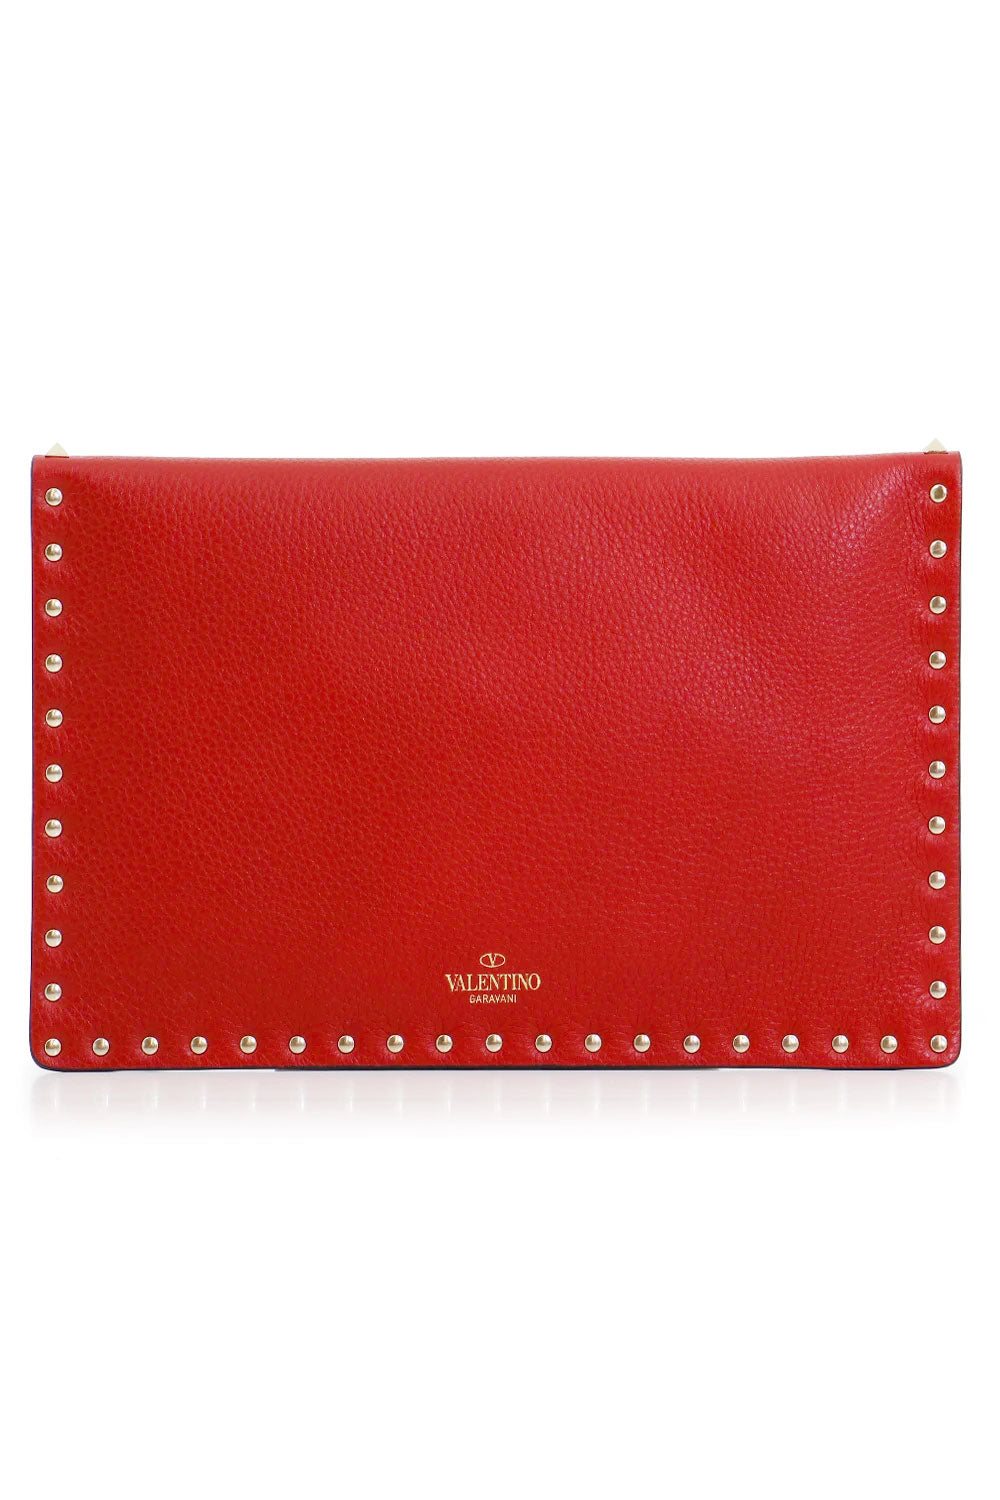 VALENTINO BAGS RED ROCKSTUD LARGE POUCH GRAINED | ROUGE PUR